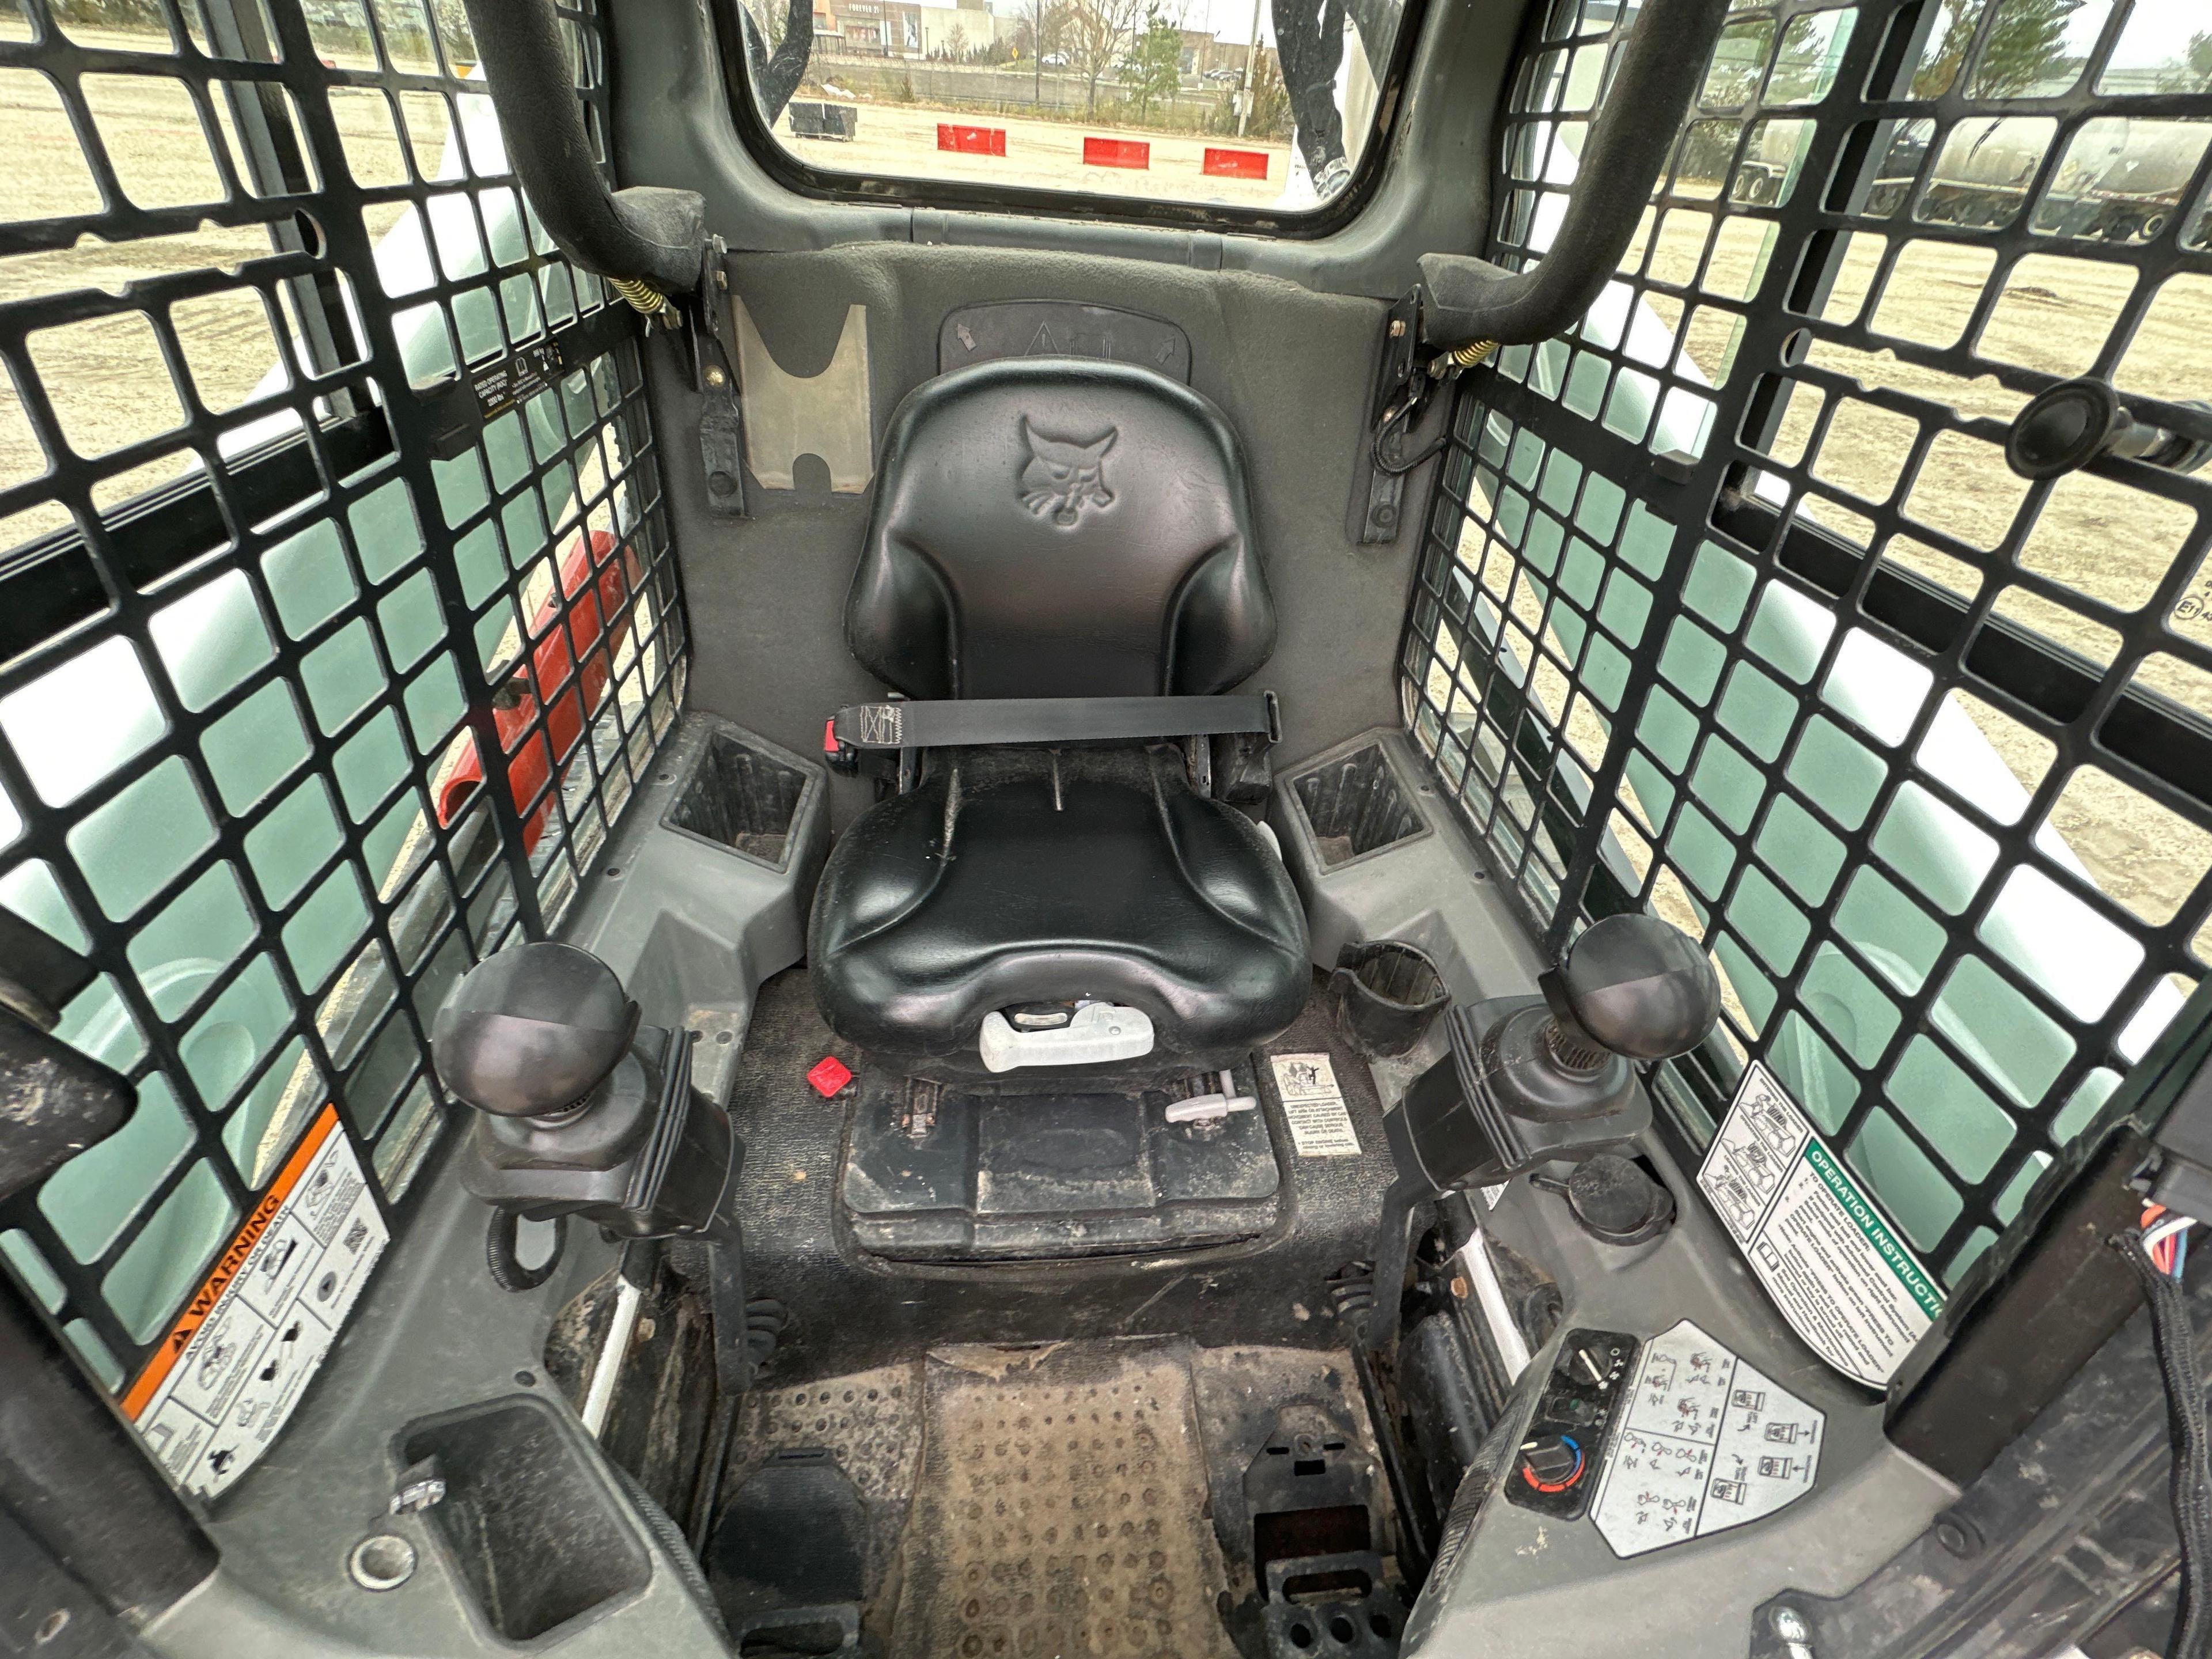 2017 BOBCAT T595 RUBBER TRACKED SKID STEER SN:B3NK13033 powered by diesel engine, equipped with